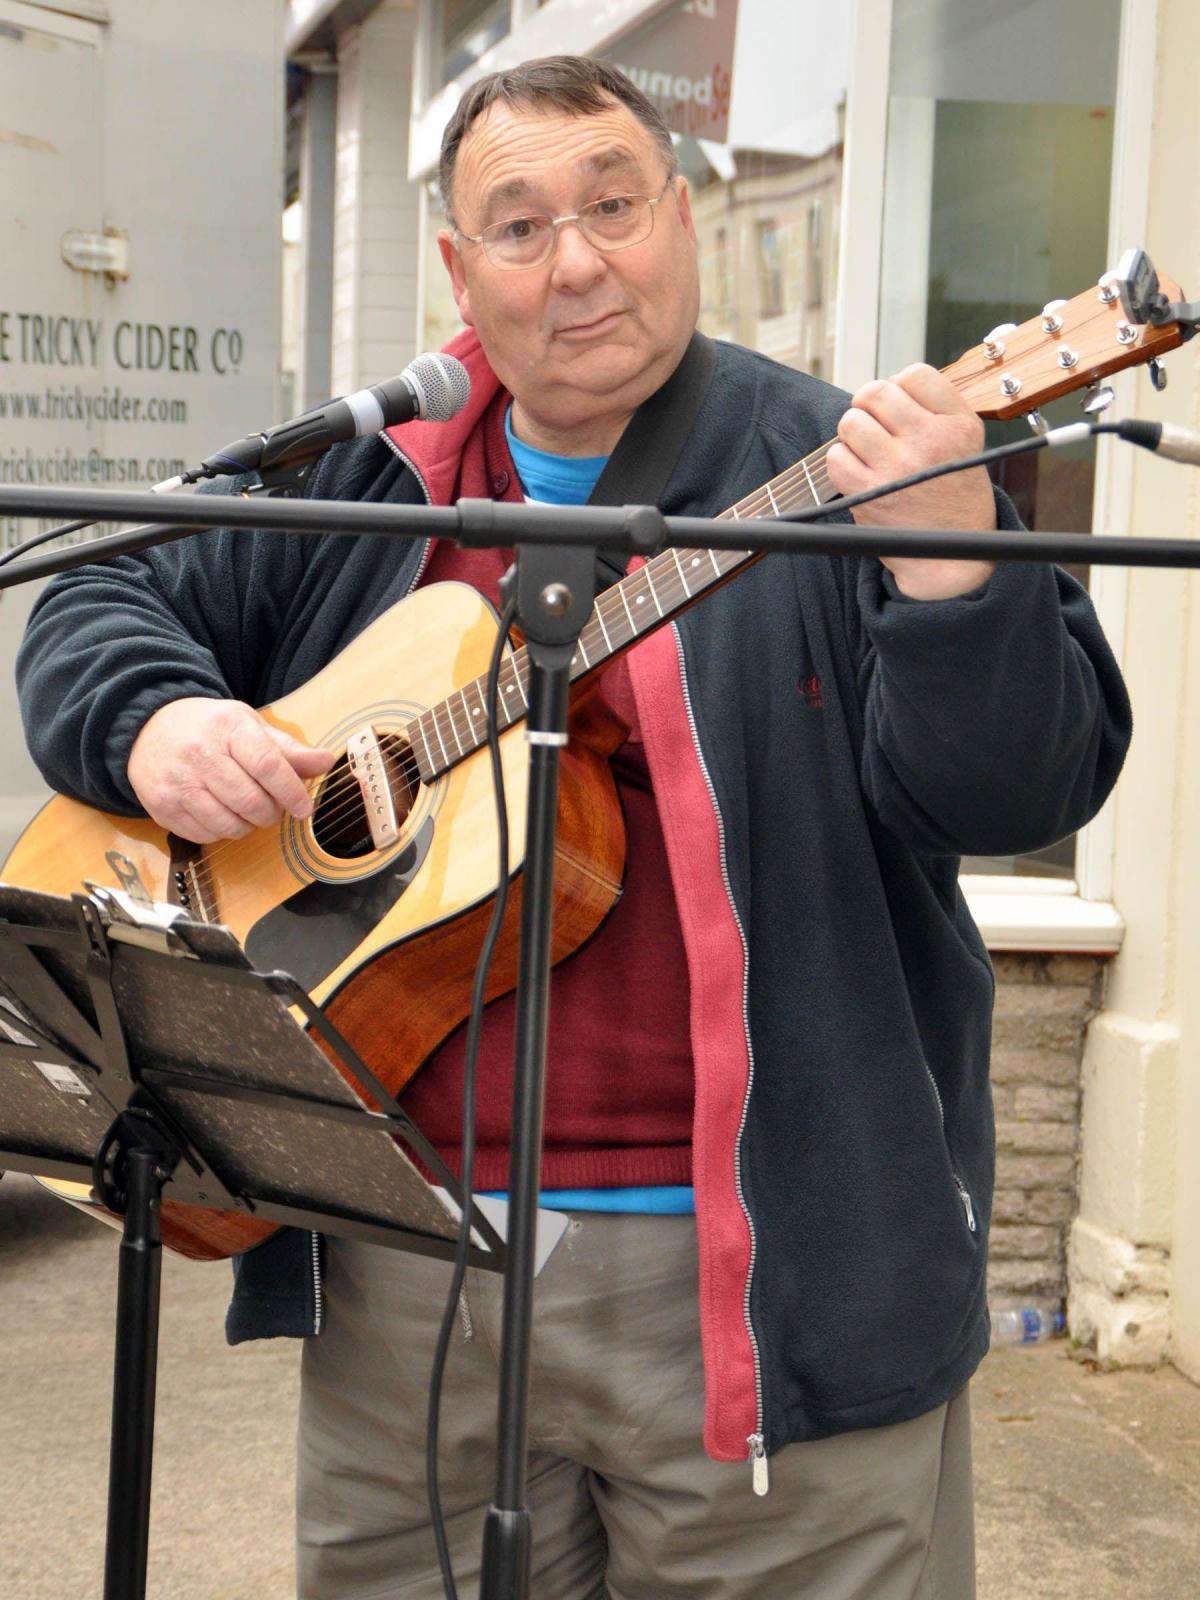 A BUSKER entertaining in College Street. PHOTO: Mike Lang